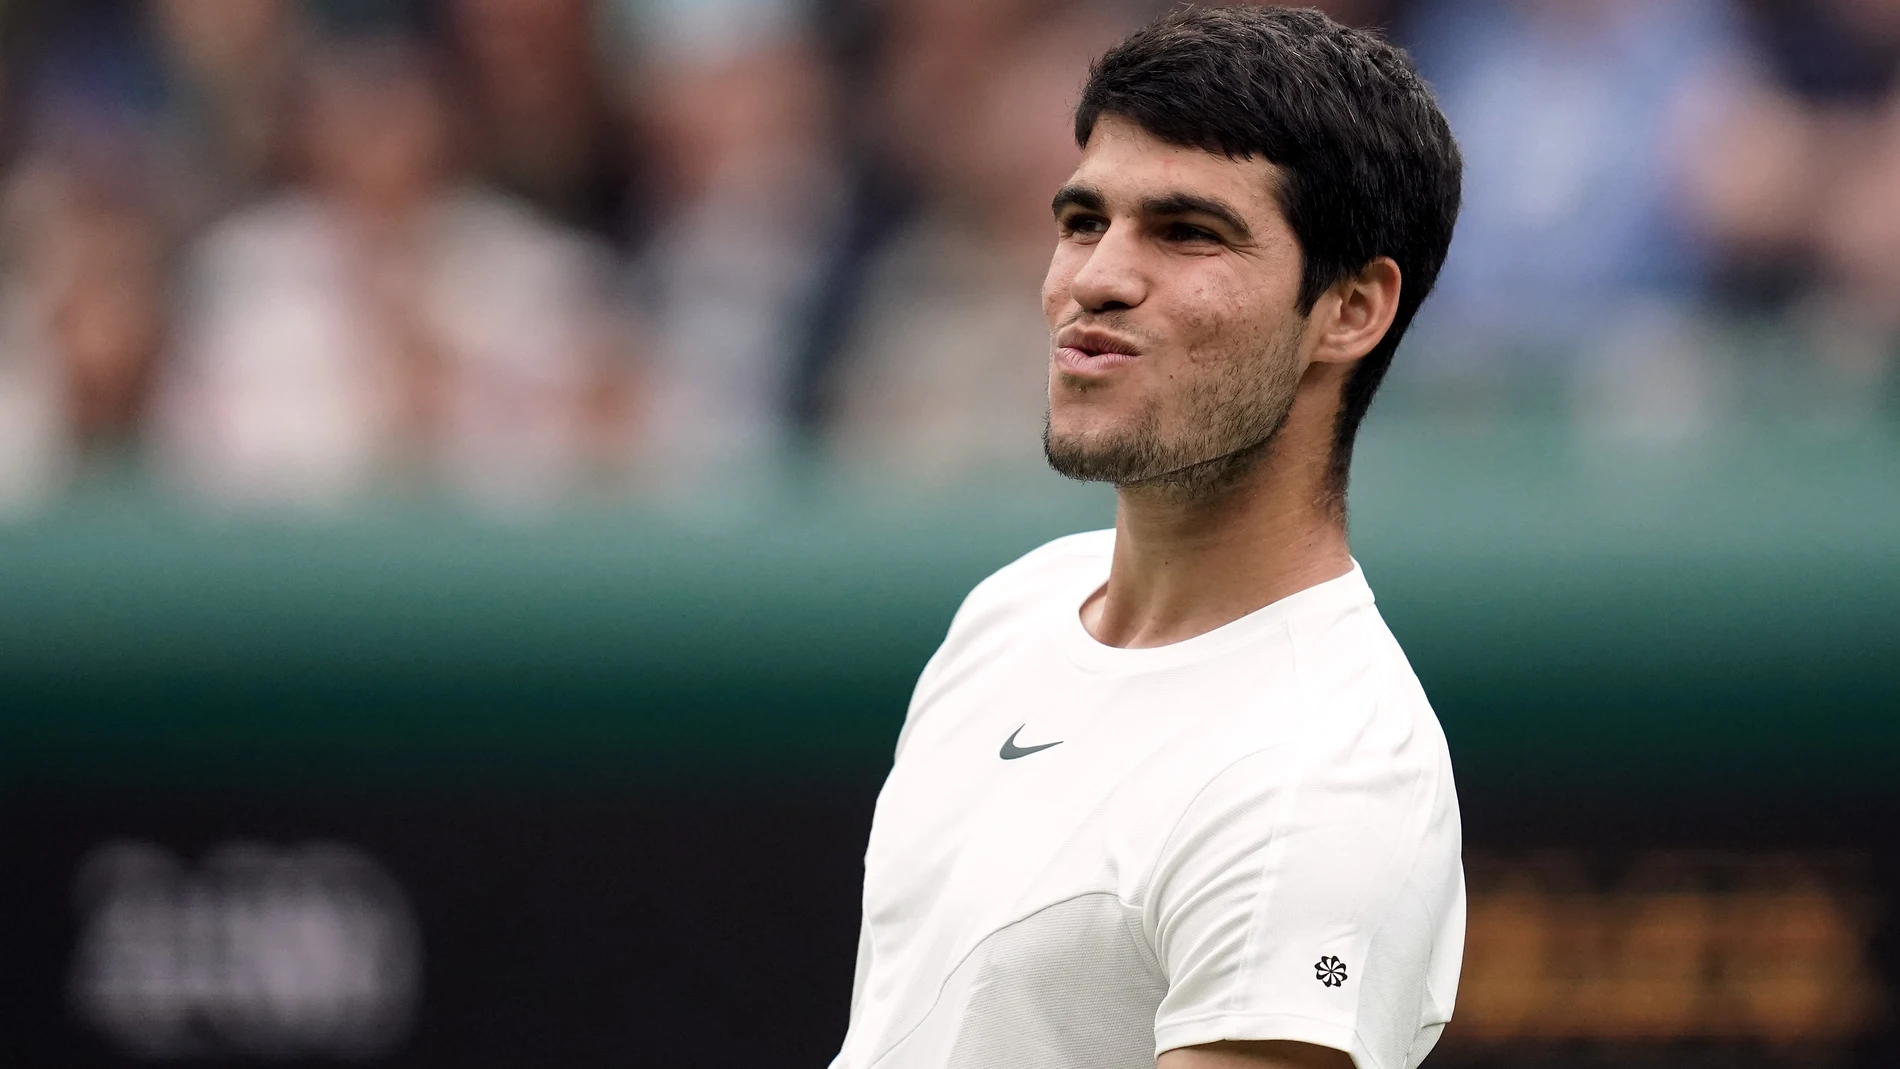 04 July 2023, United Kingdom, London: Spanish tennis player Carlos Alcaraz reacts his men's singles match against France's Jeremy Chardy on day two of the 2023 Wimbledon Tennis tournament at the All England Lawn Tennis and Croquet Club. Photo: Victoria Jones/PA Wire/dpa 04/07/2023 ONLY FOR USE IN SPAIN